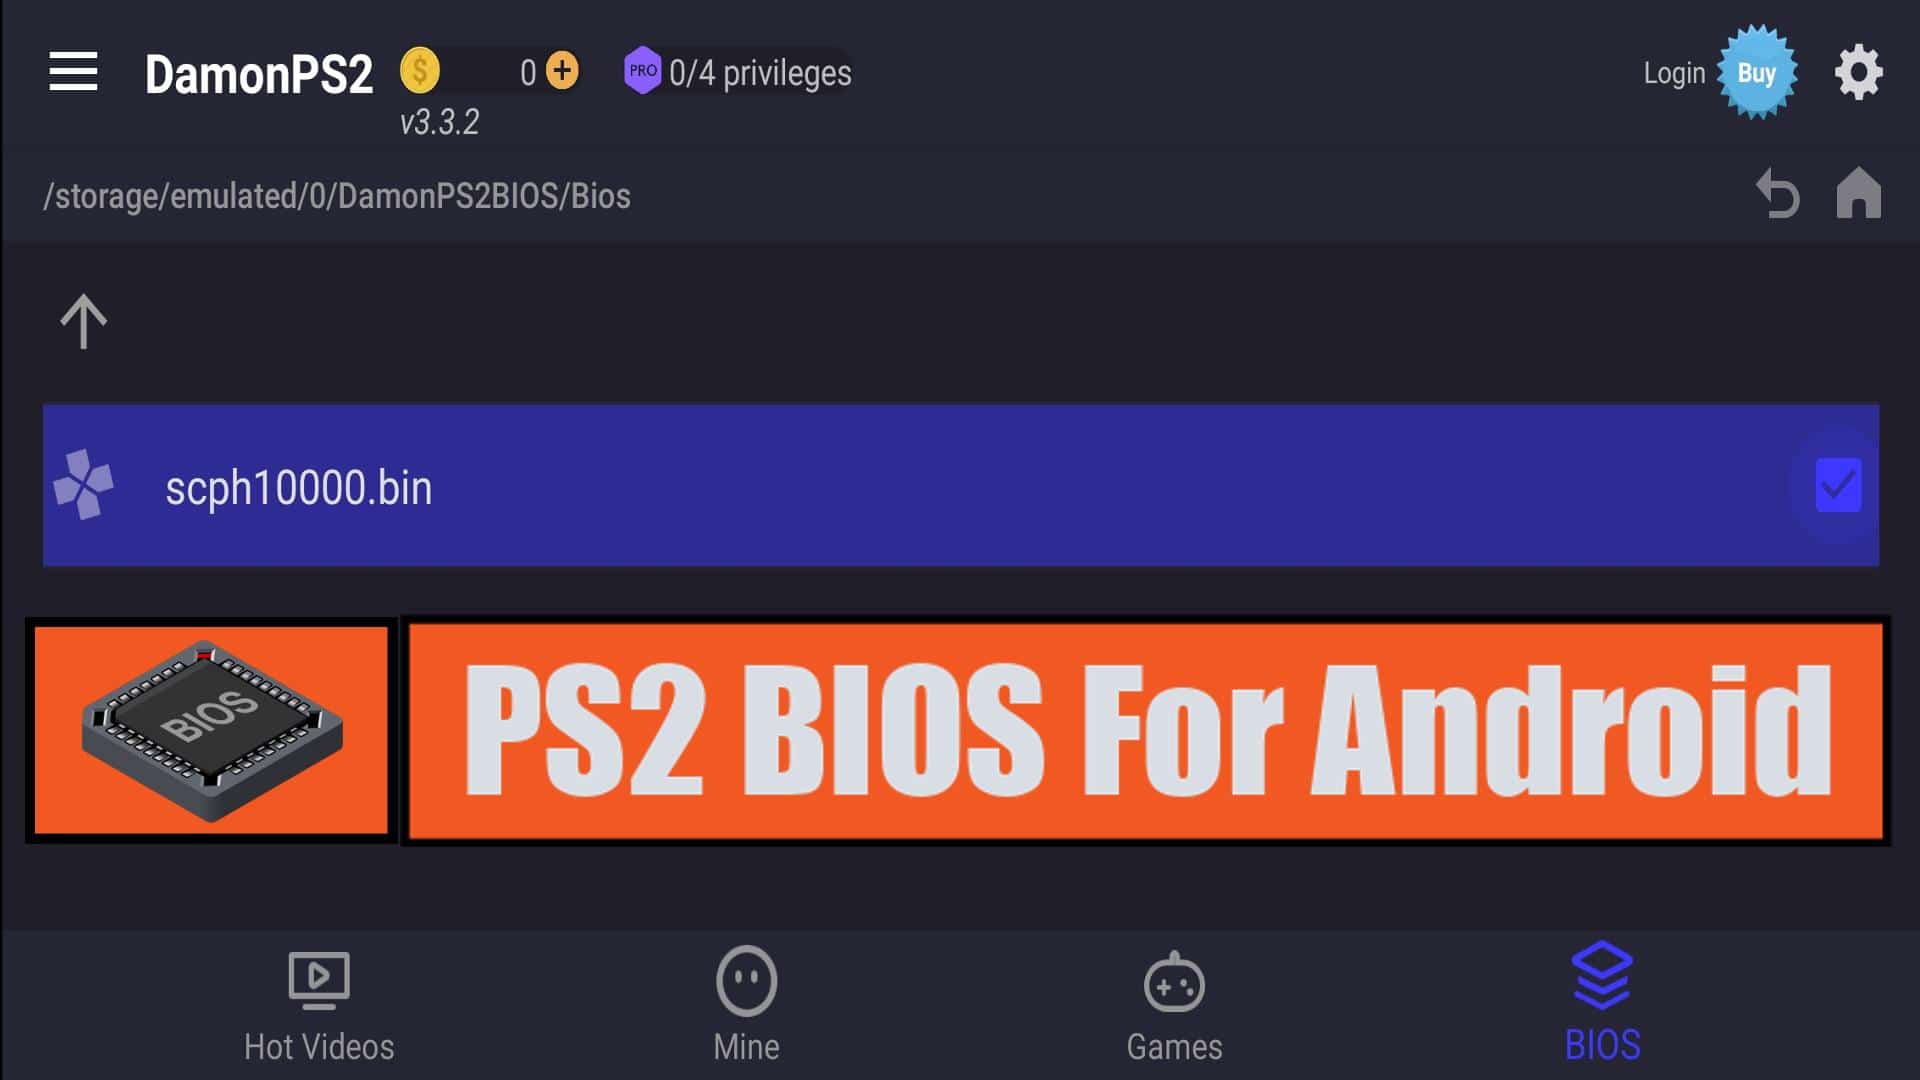 ps2 bios usa android